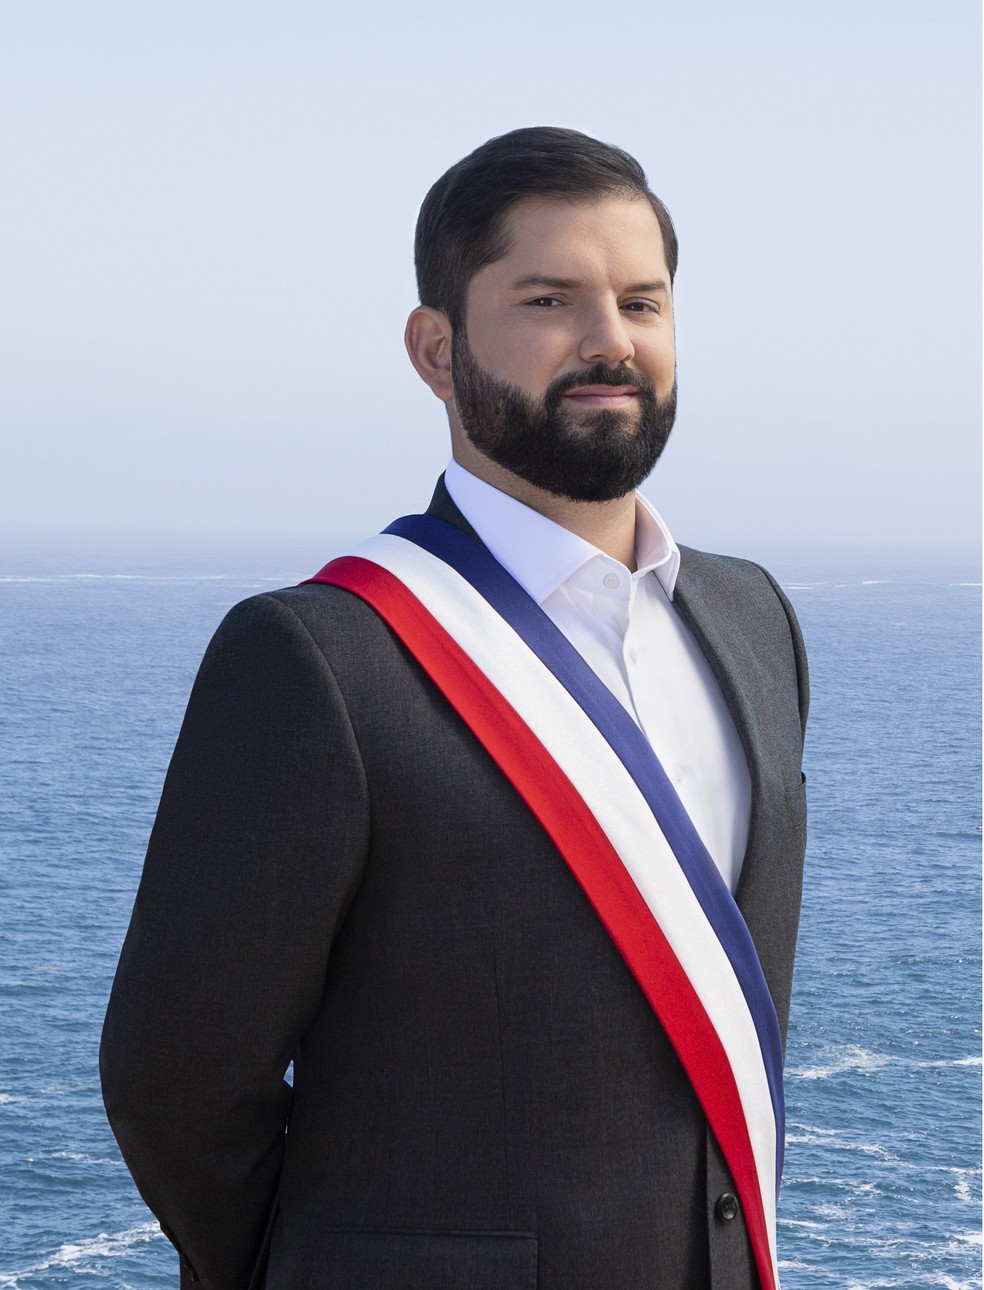 Gabriel Boric, presidente do Chile — Foto: Governo do Chile, CC BY 3.0 cl, https://commons.wikimedia.org/w/index.php?curid=115988756